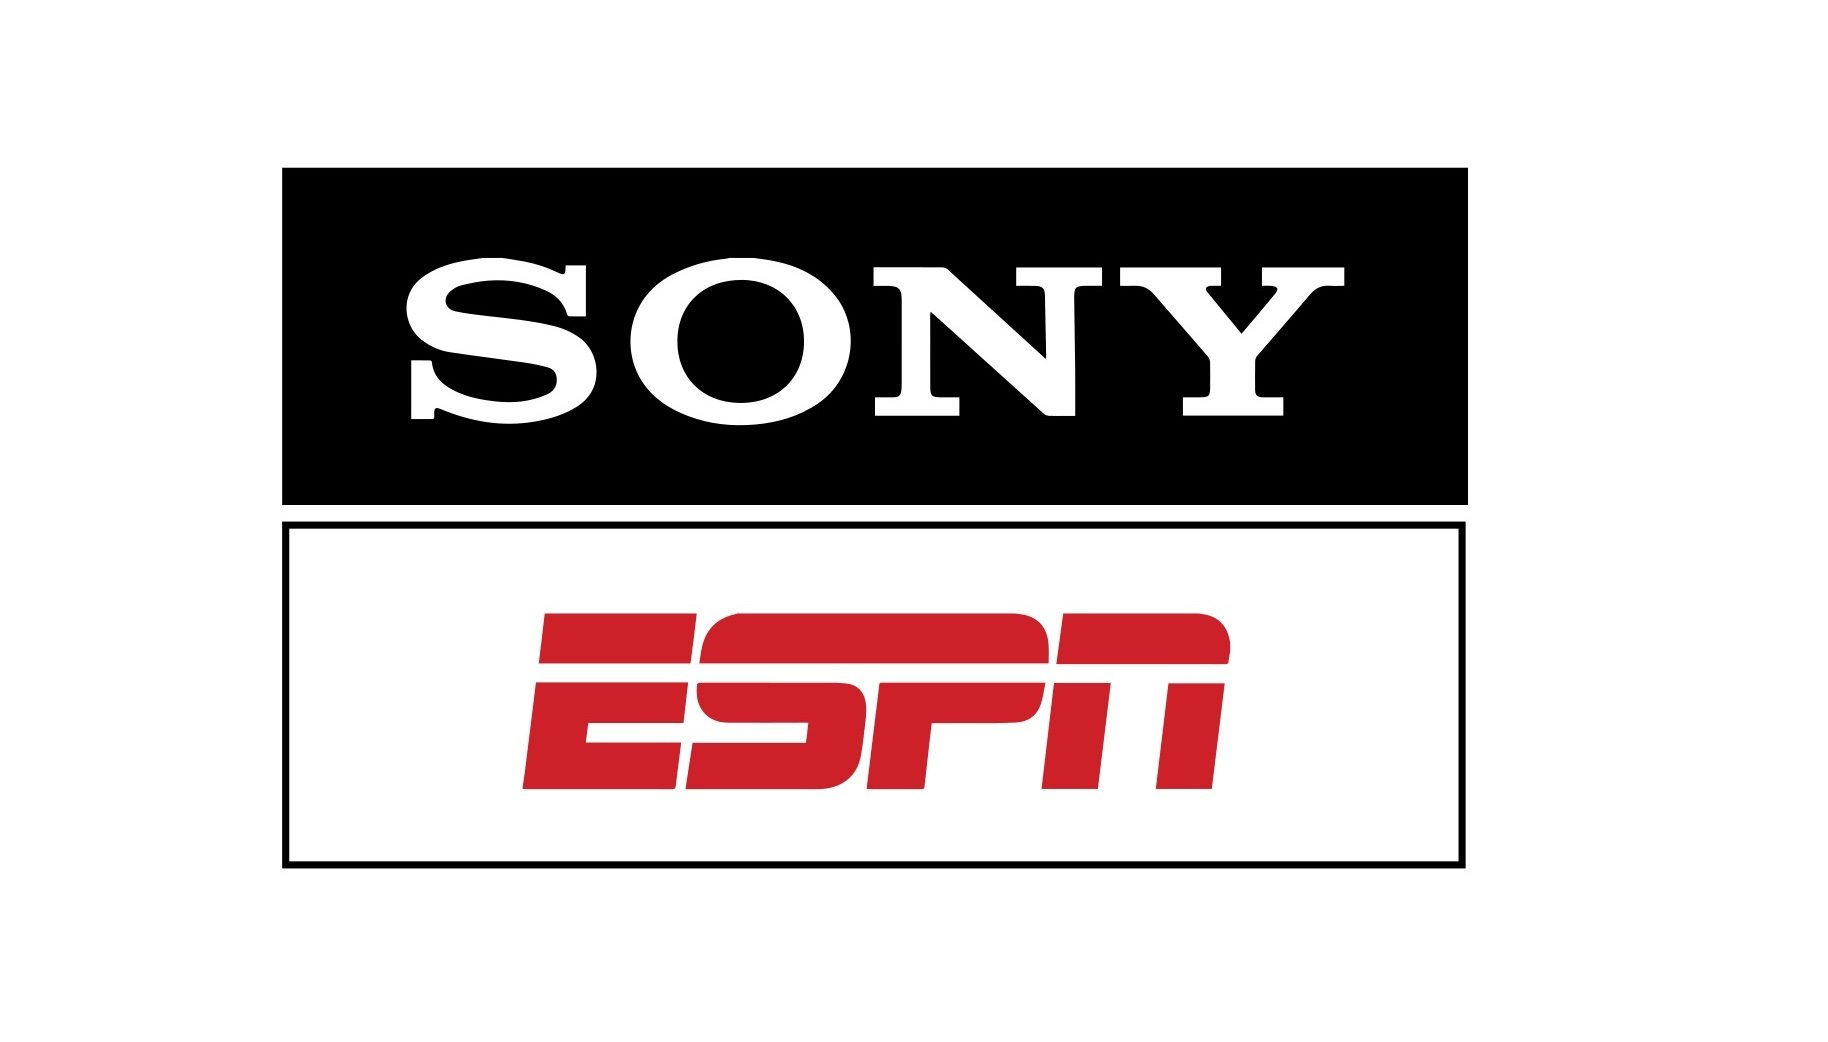 Sony ESPN Tv Schedule Today - Sony ESPN Schedule, Program show timings, live tv & Popular shows for today in India